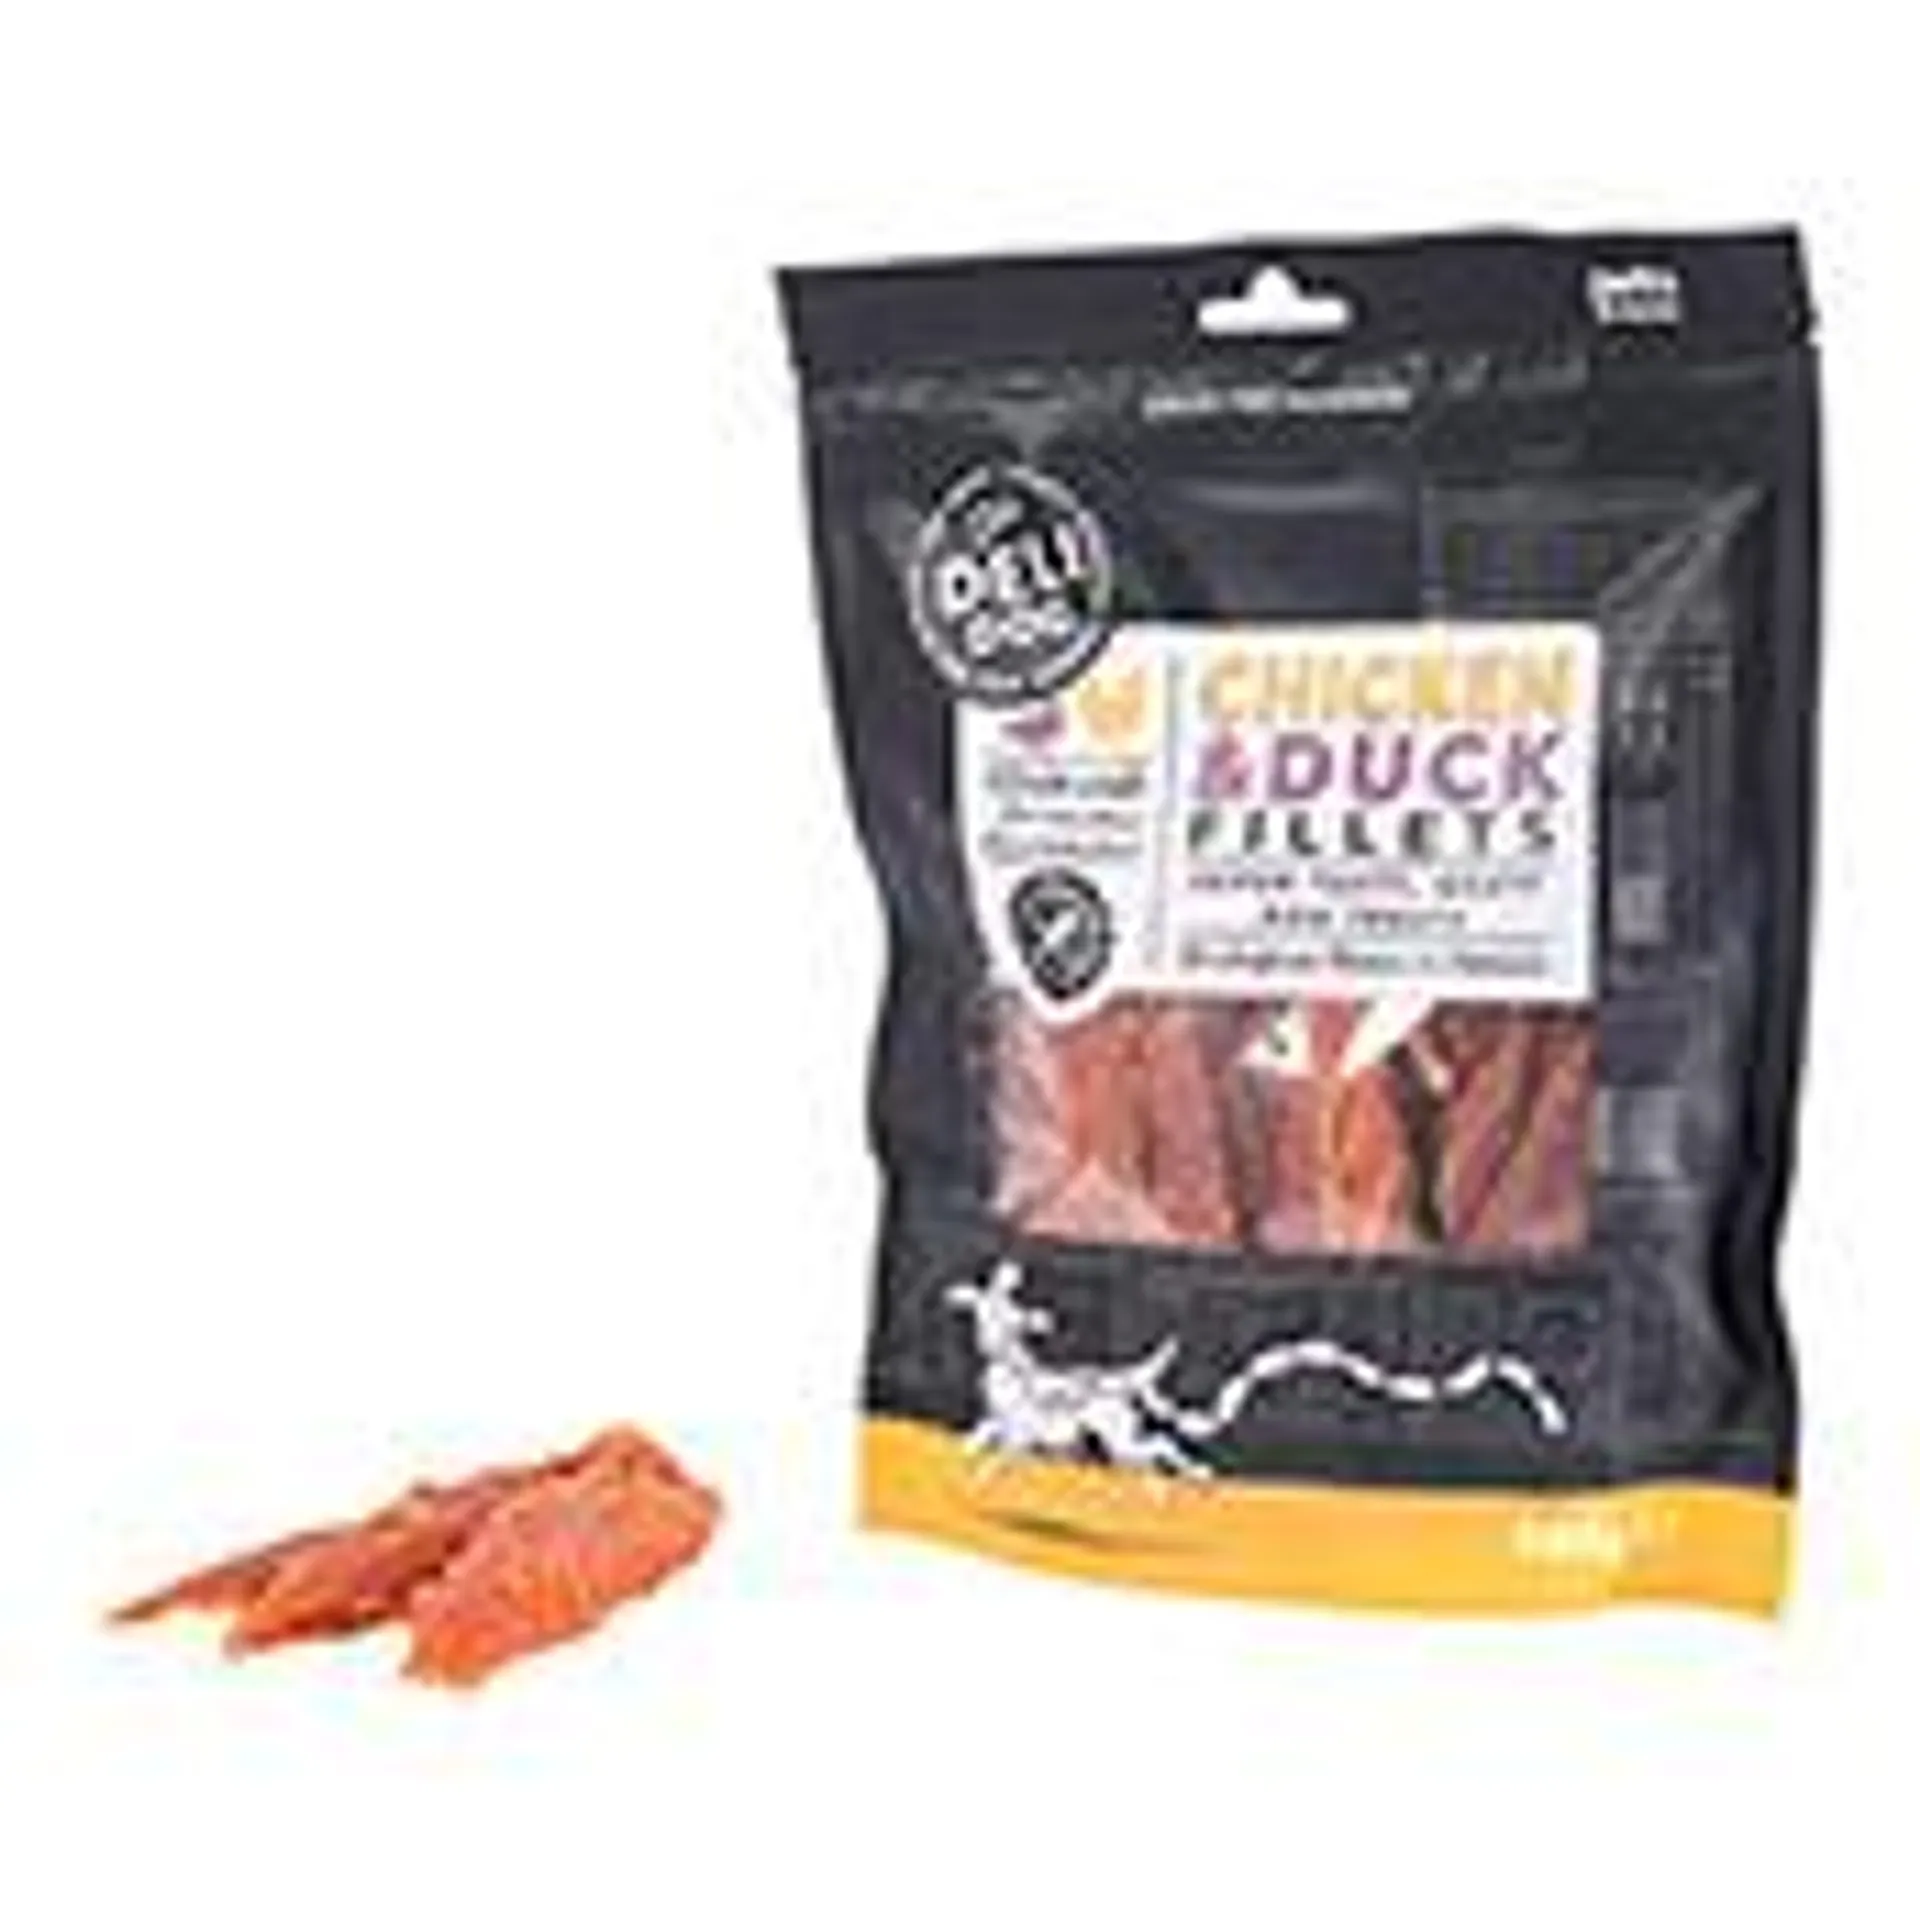 Pets at Home The Deli Dog Chicken and Duck Fillet Adult Dog Treats 500g